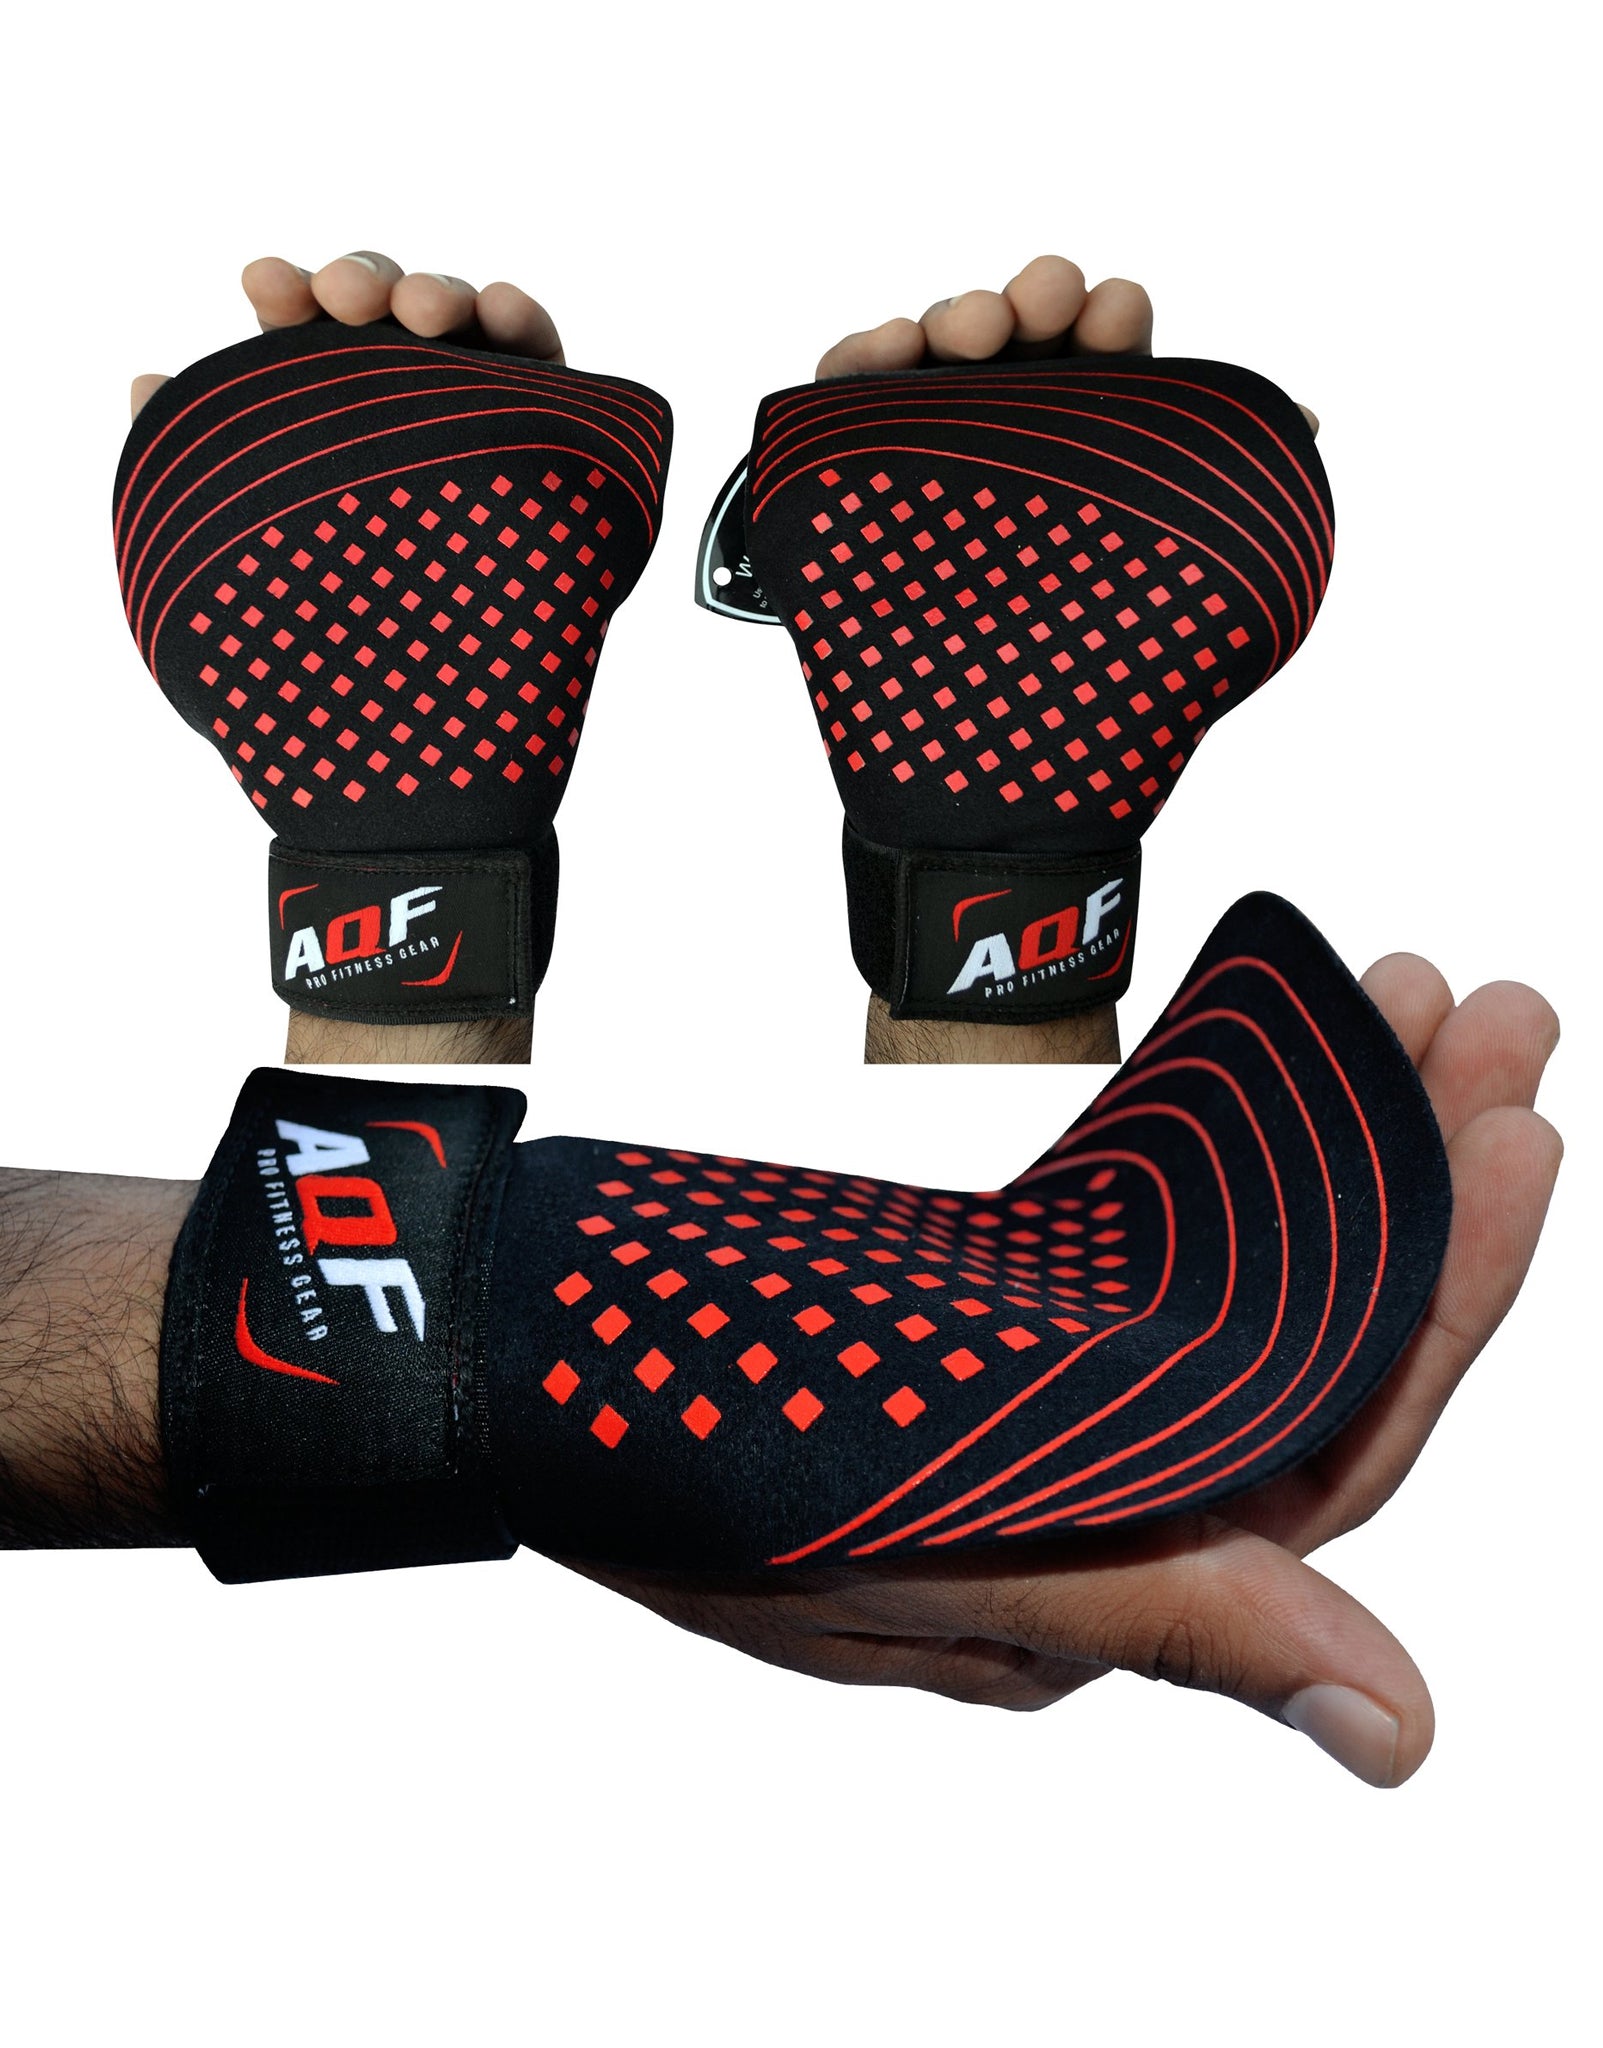 AQF Leather Weight Lifting Gel Palm Grip